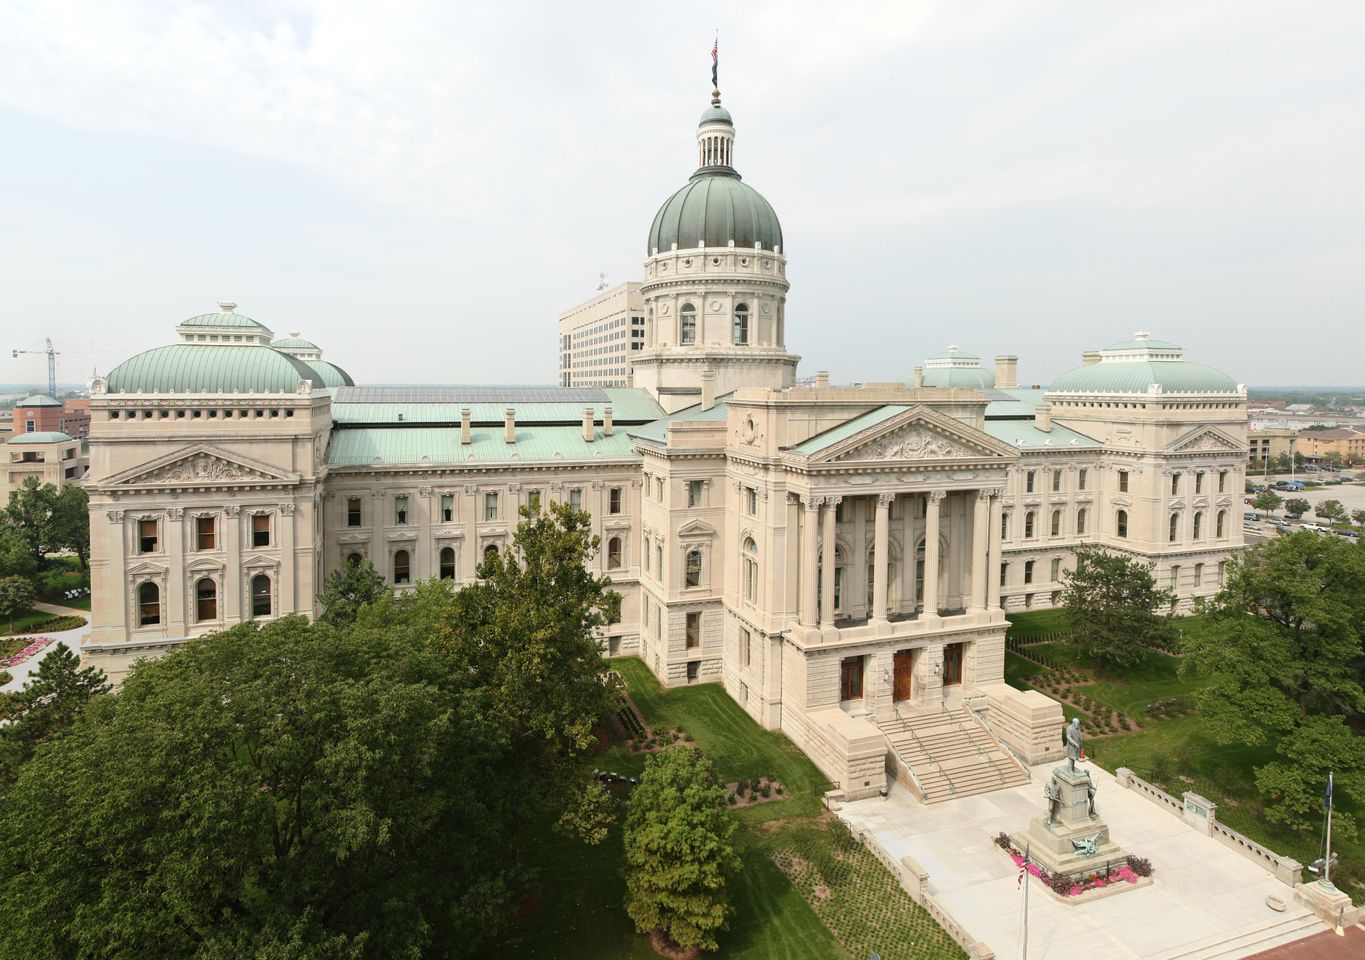 Indiana Lawmaker Proposes Age Verification Bill